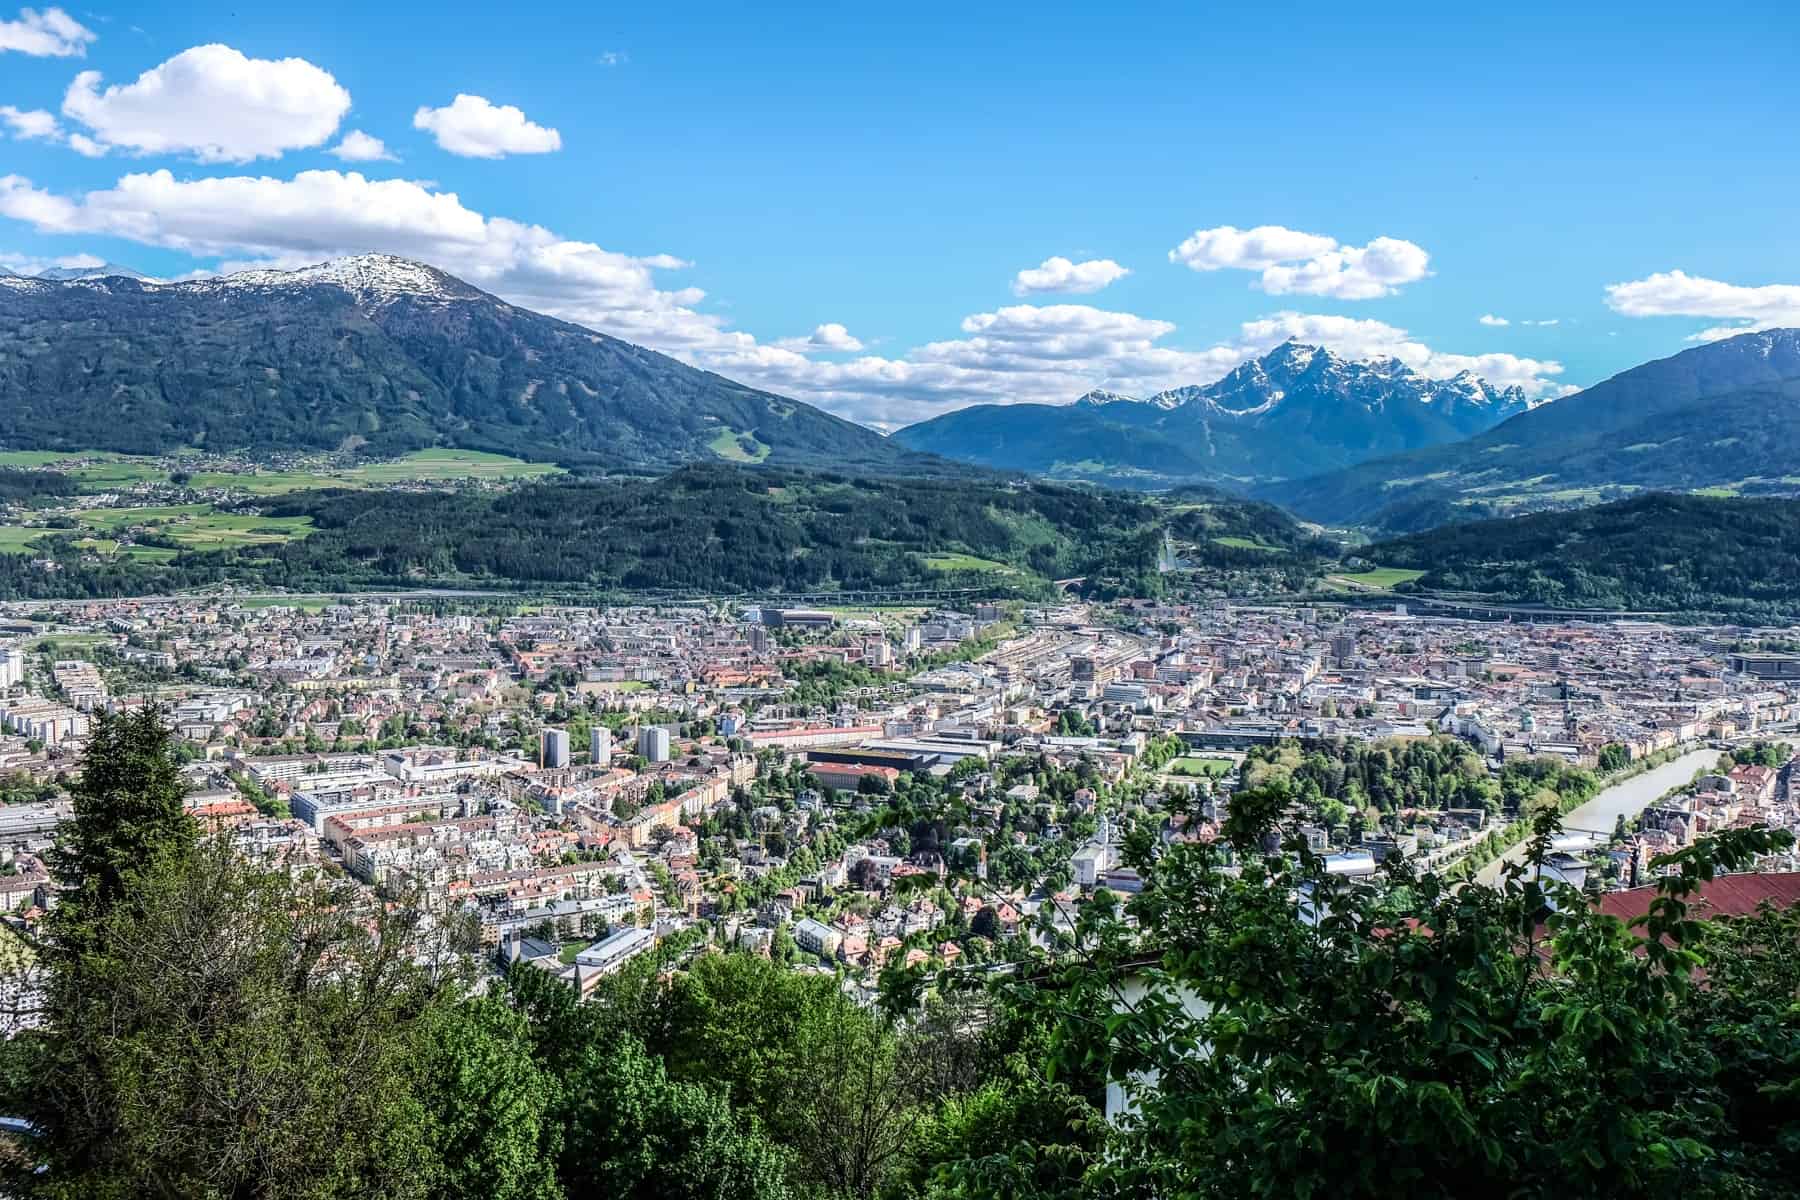 View of Innsbruck in Austria from the city's Nordkette Mountain showing the compact city urban basin